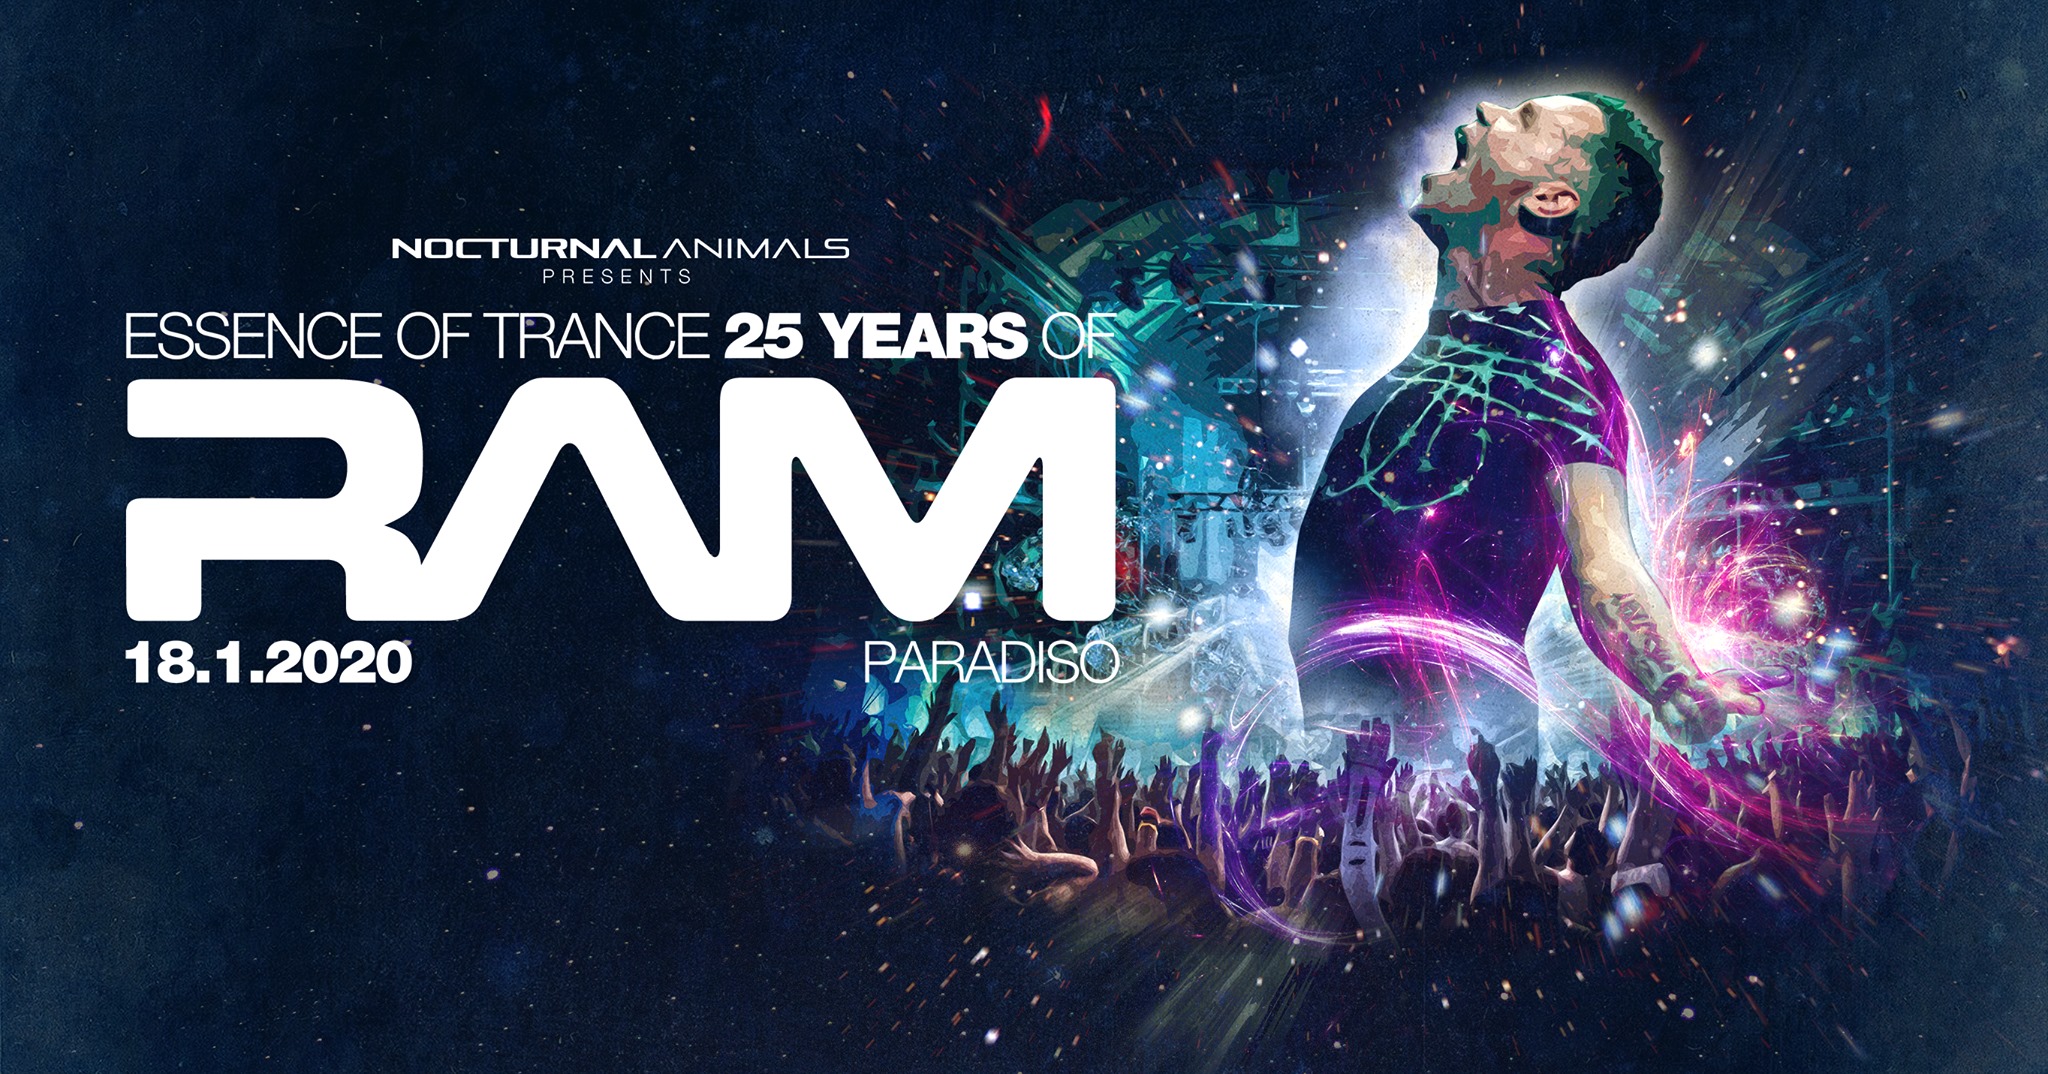 Nocturnal Animals present Essence Of Trance – 25 Years Of RAM at Paradiso club, Amsterdam, The Netherlands on 18th of January 2020